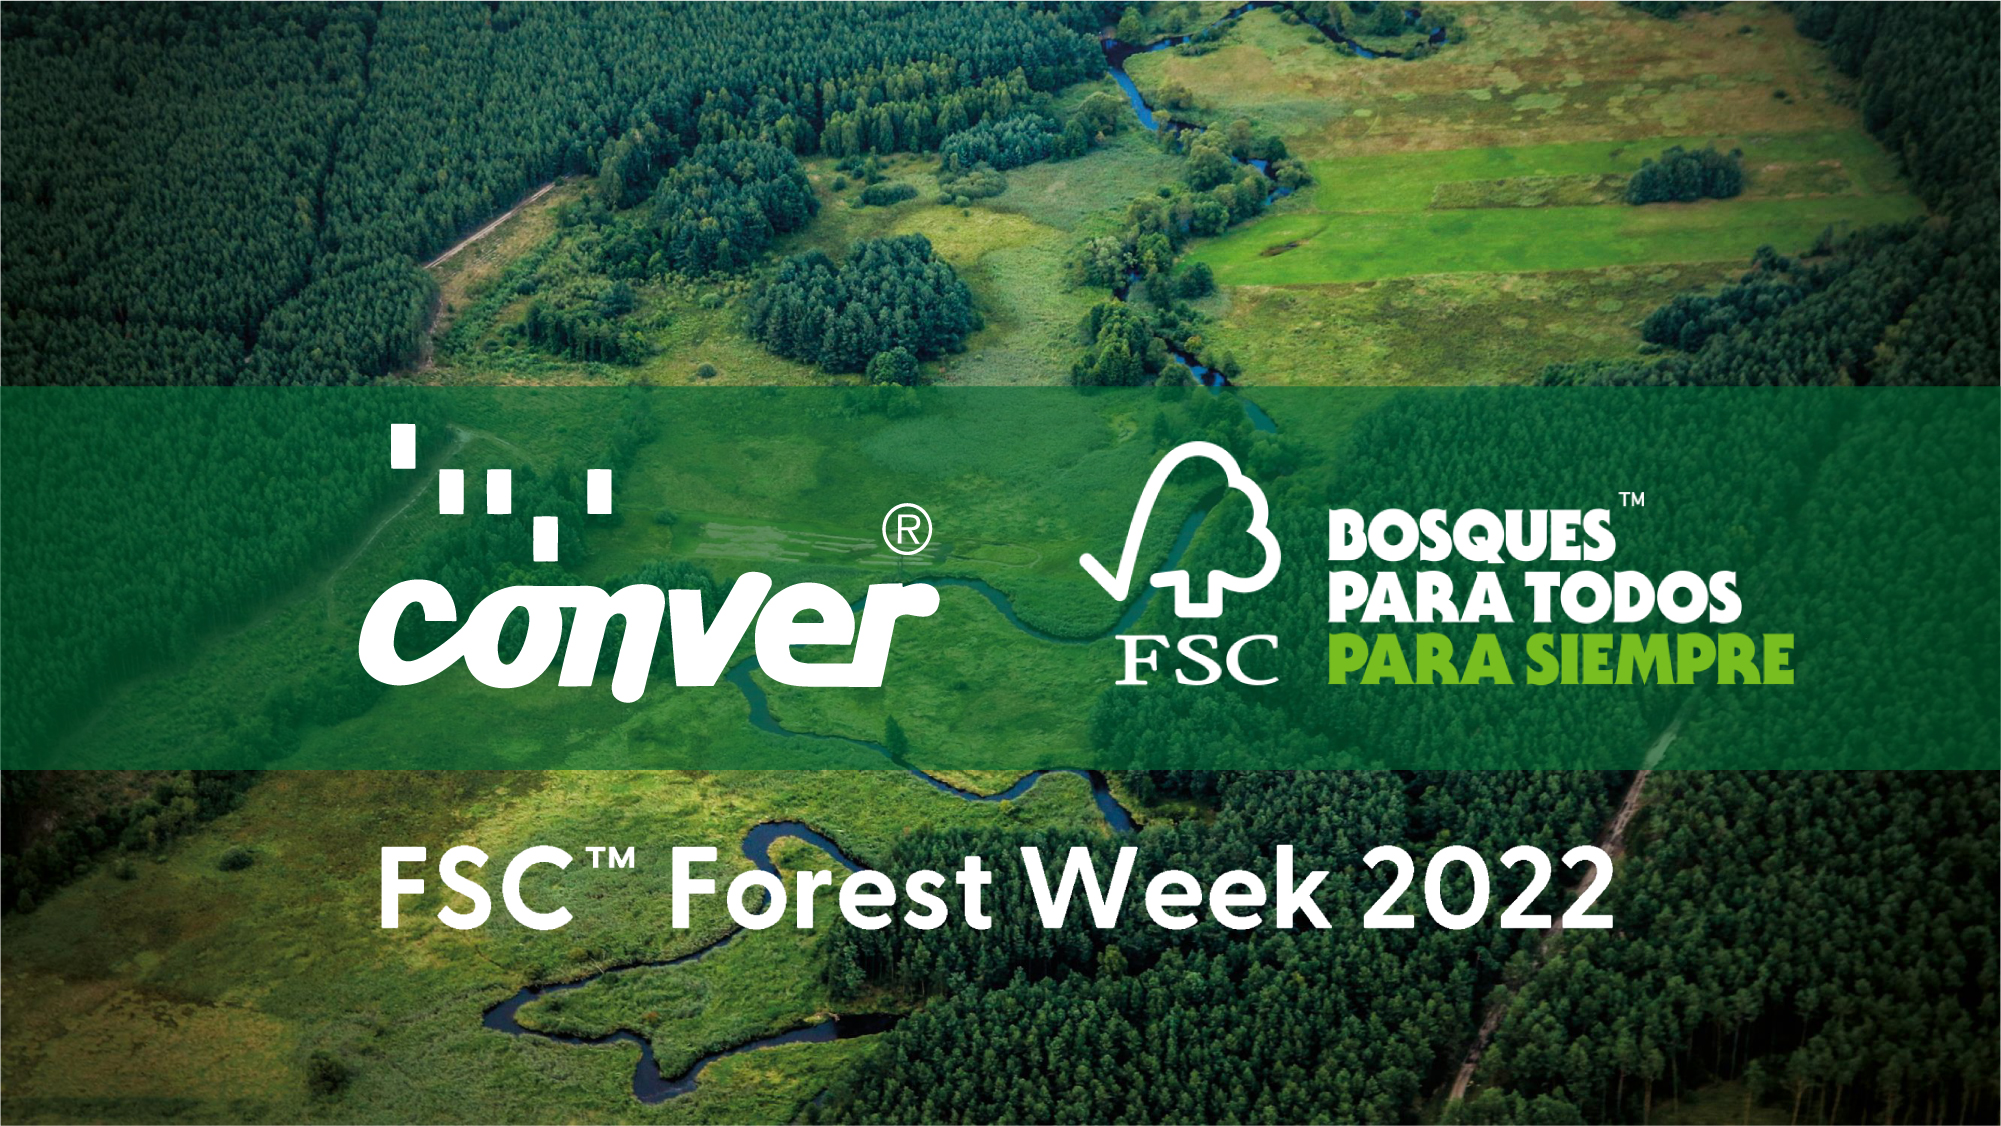 Forest Week 2022 conver